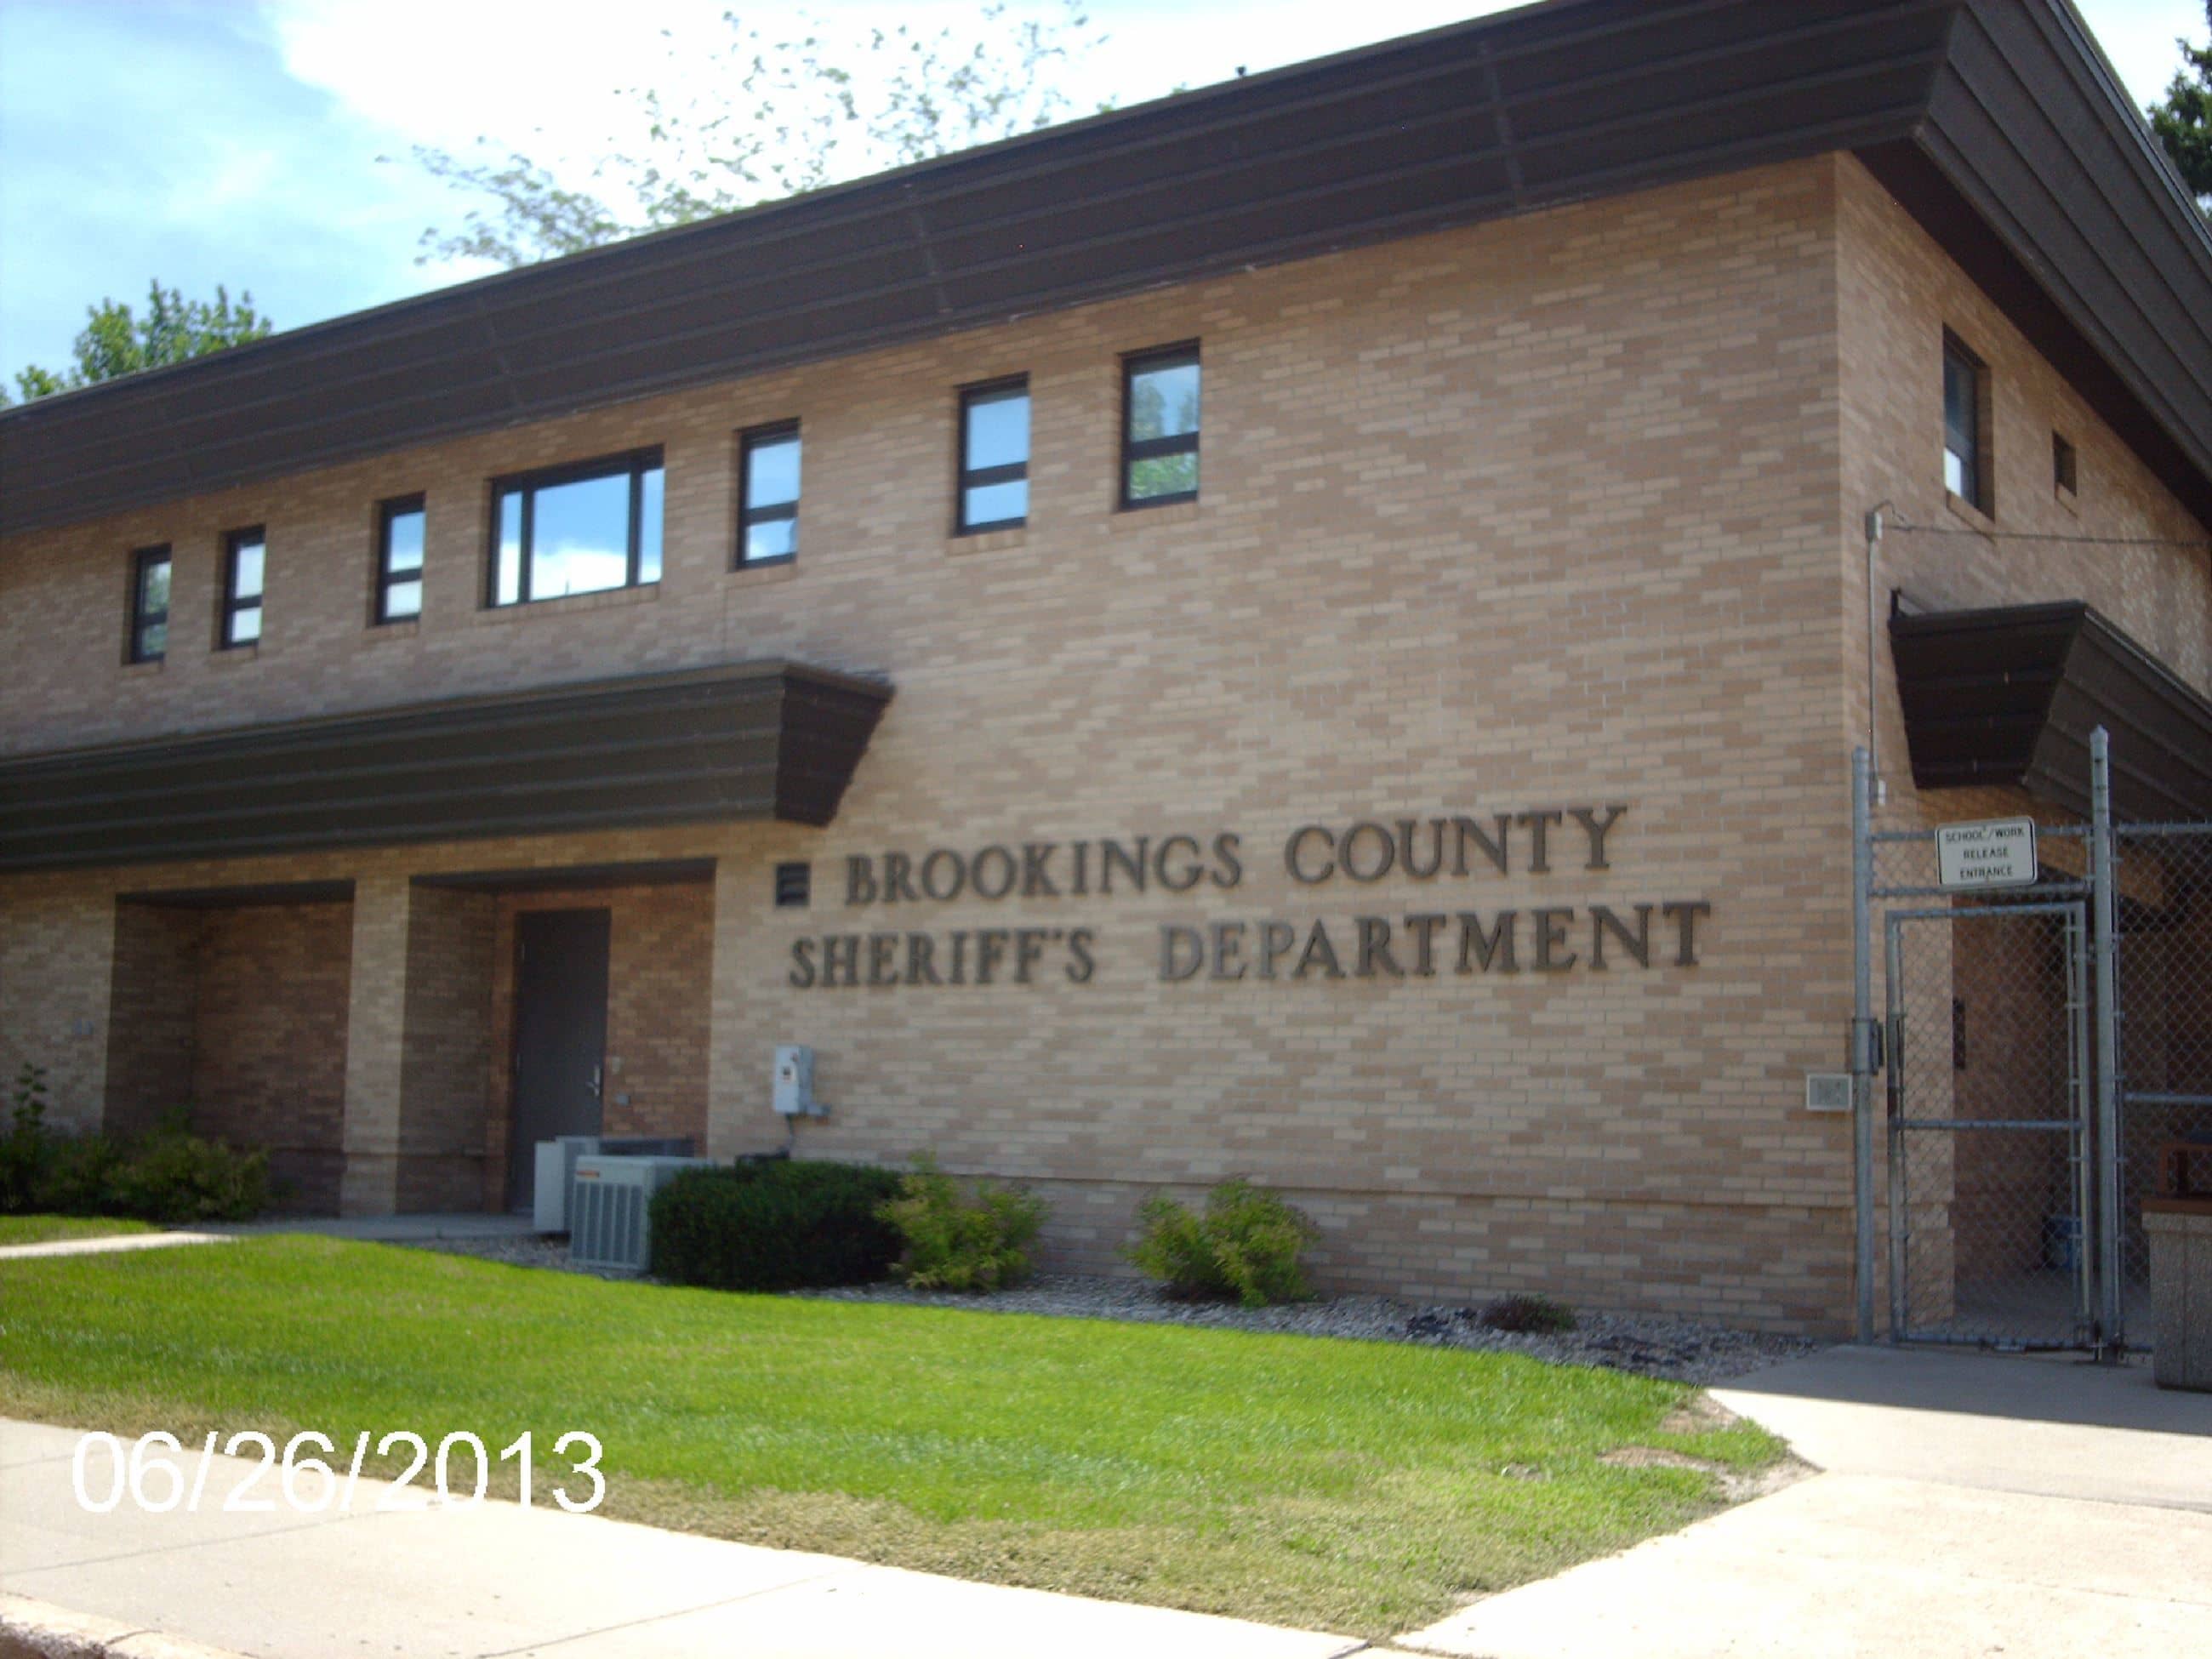 Brookings County Detention Center